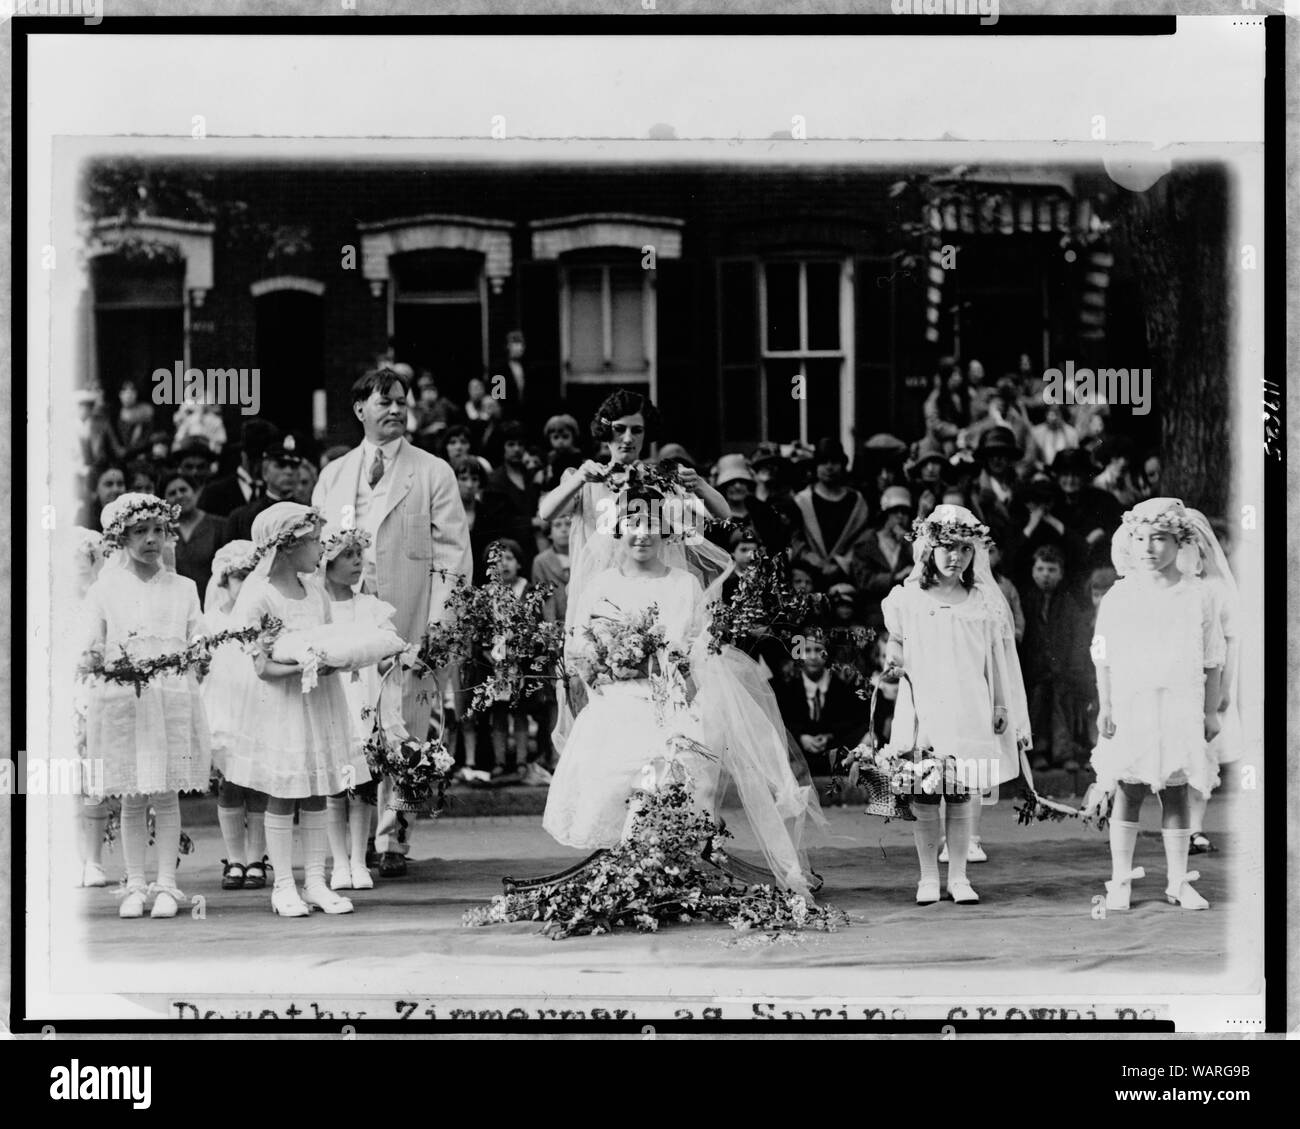 Dorothy Zimmerman, as Spring, crowning Irma Sweeney as the May Queen at the May Day festival at the Neighborhood House, Washington, D.C. Stock Photo